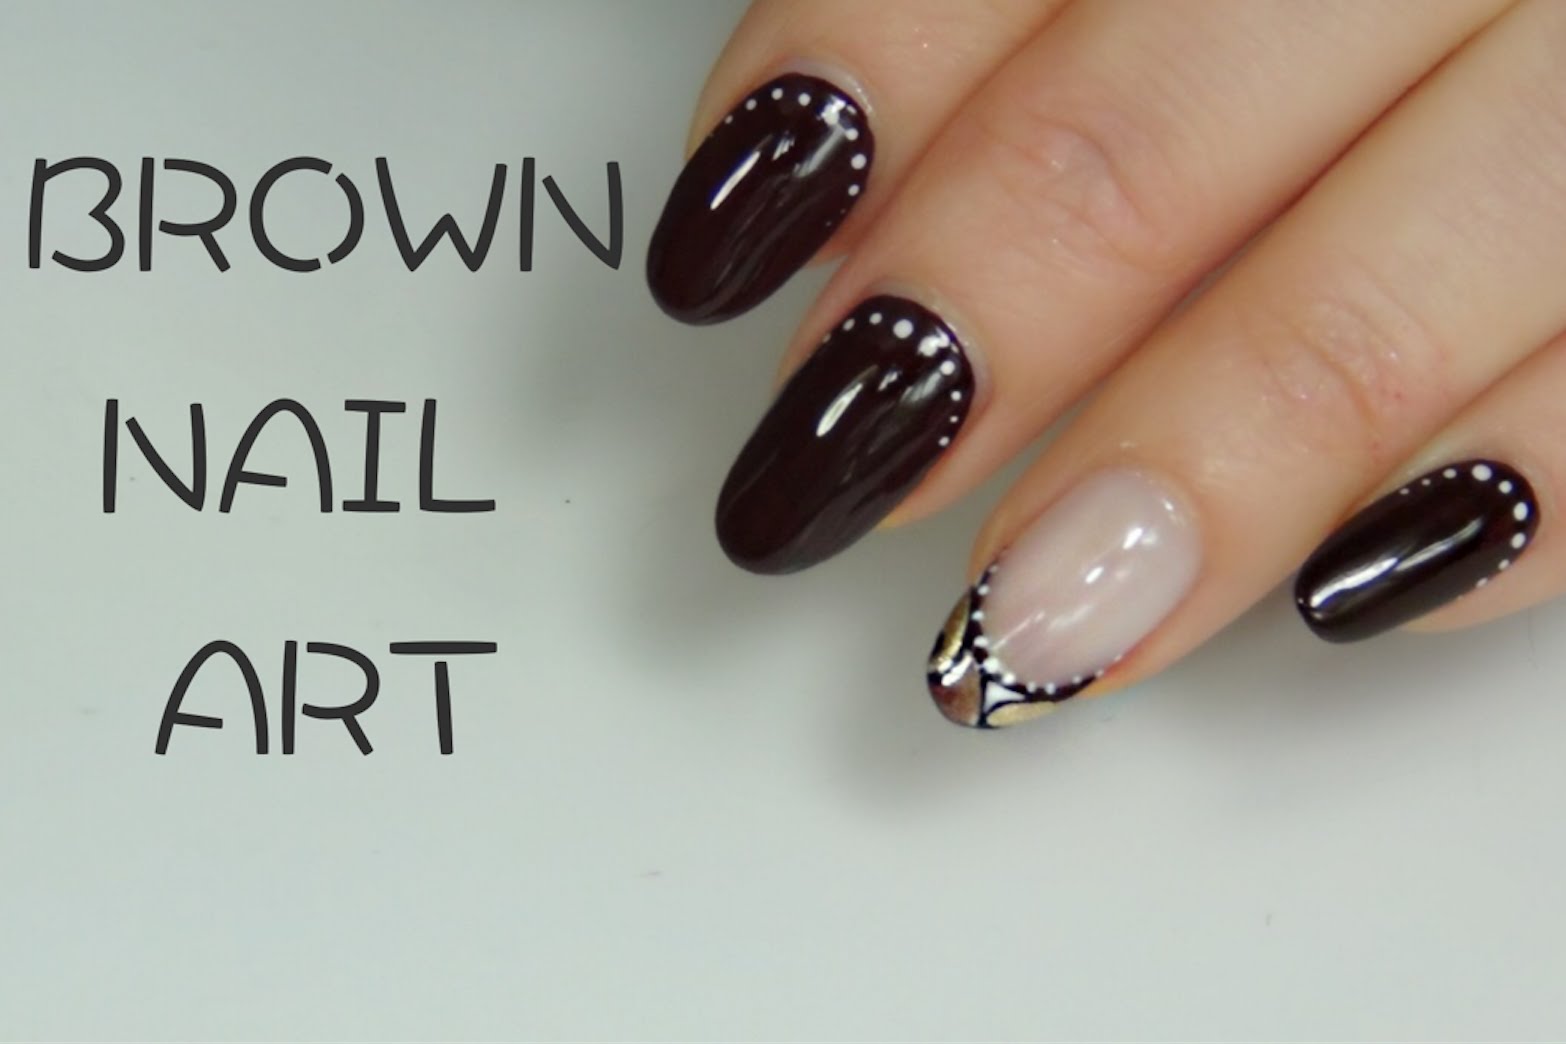 1. 10 Nail Art Ideas for Brown Skin - wide 5